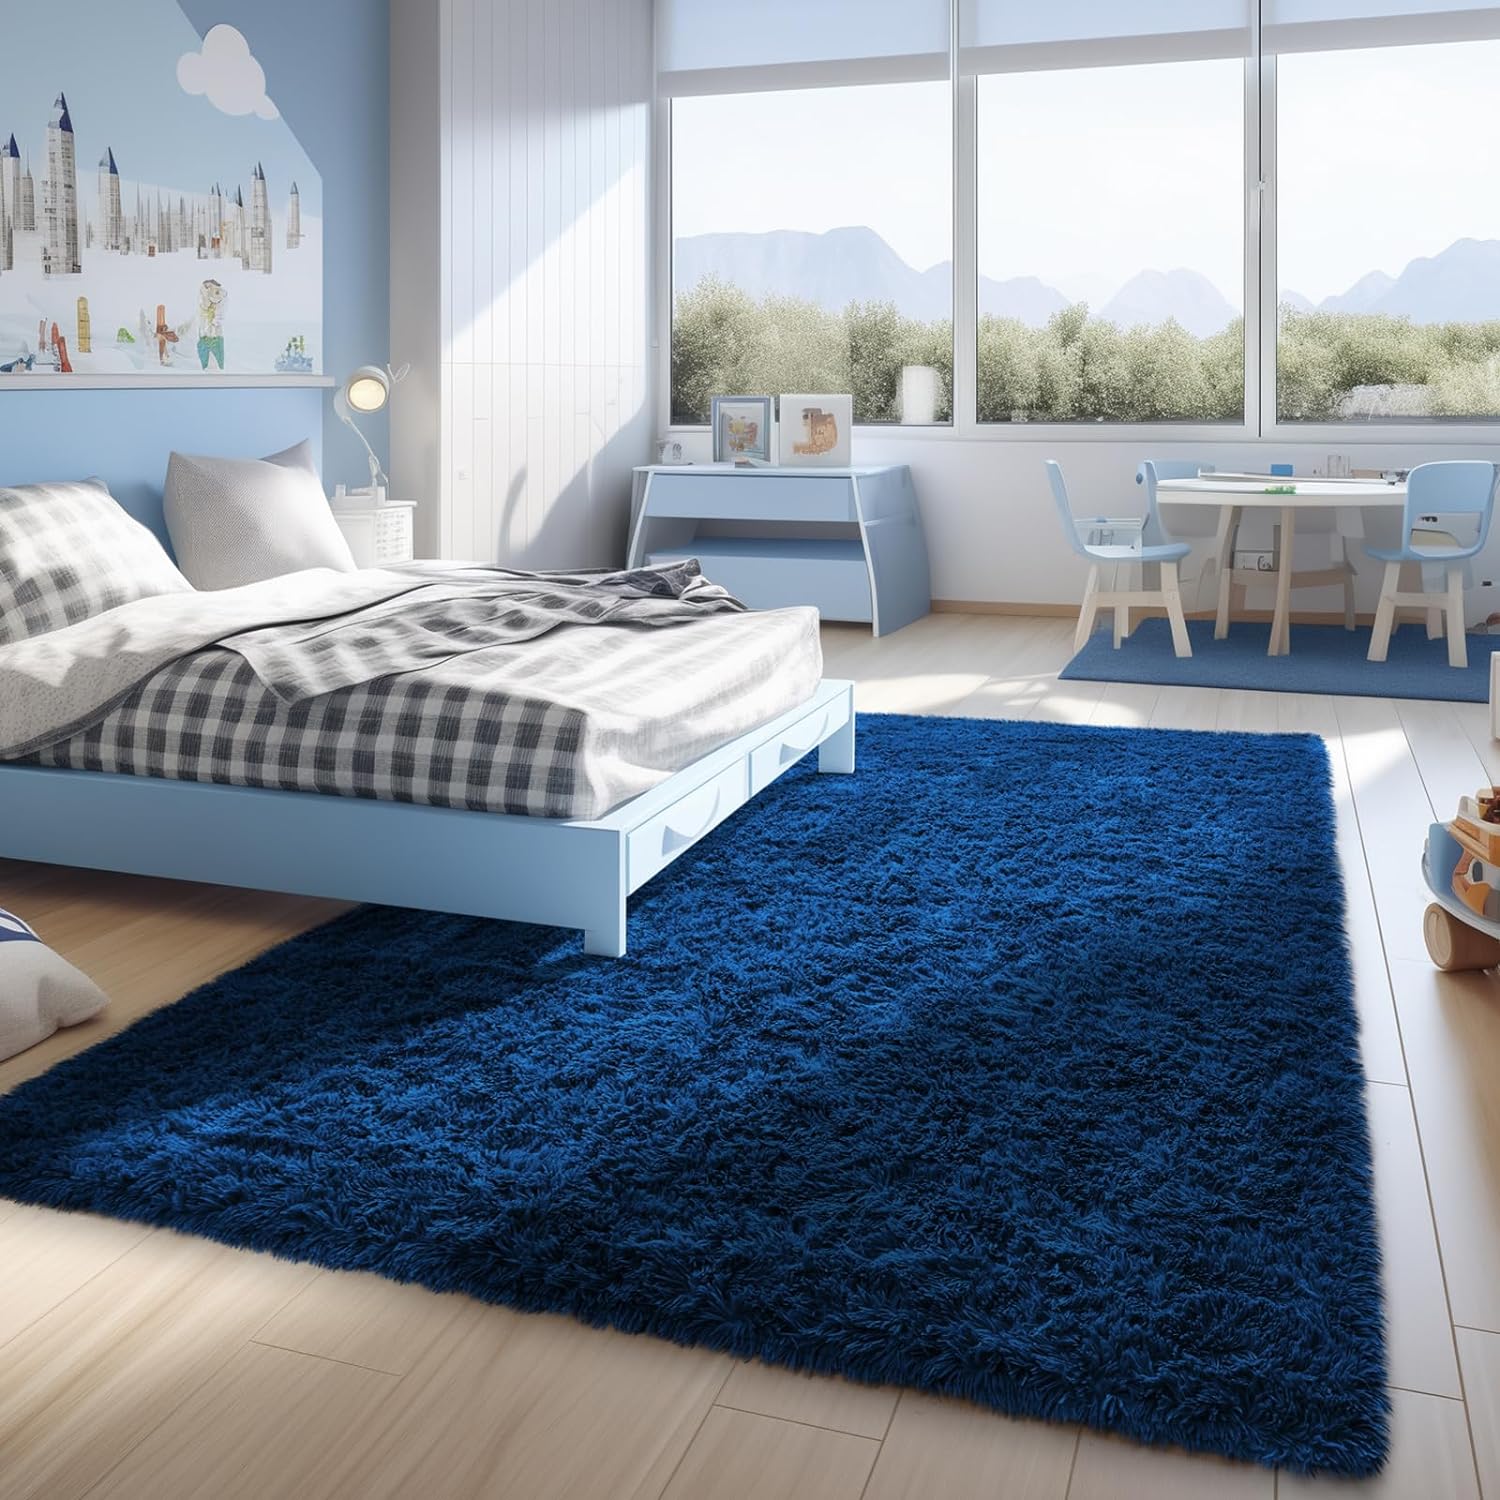 Shag rugs are a classic trend in a kids room